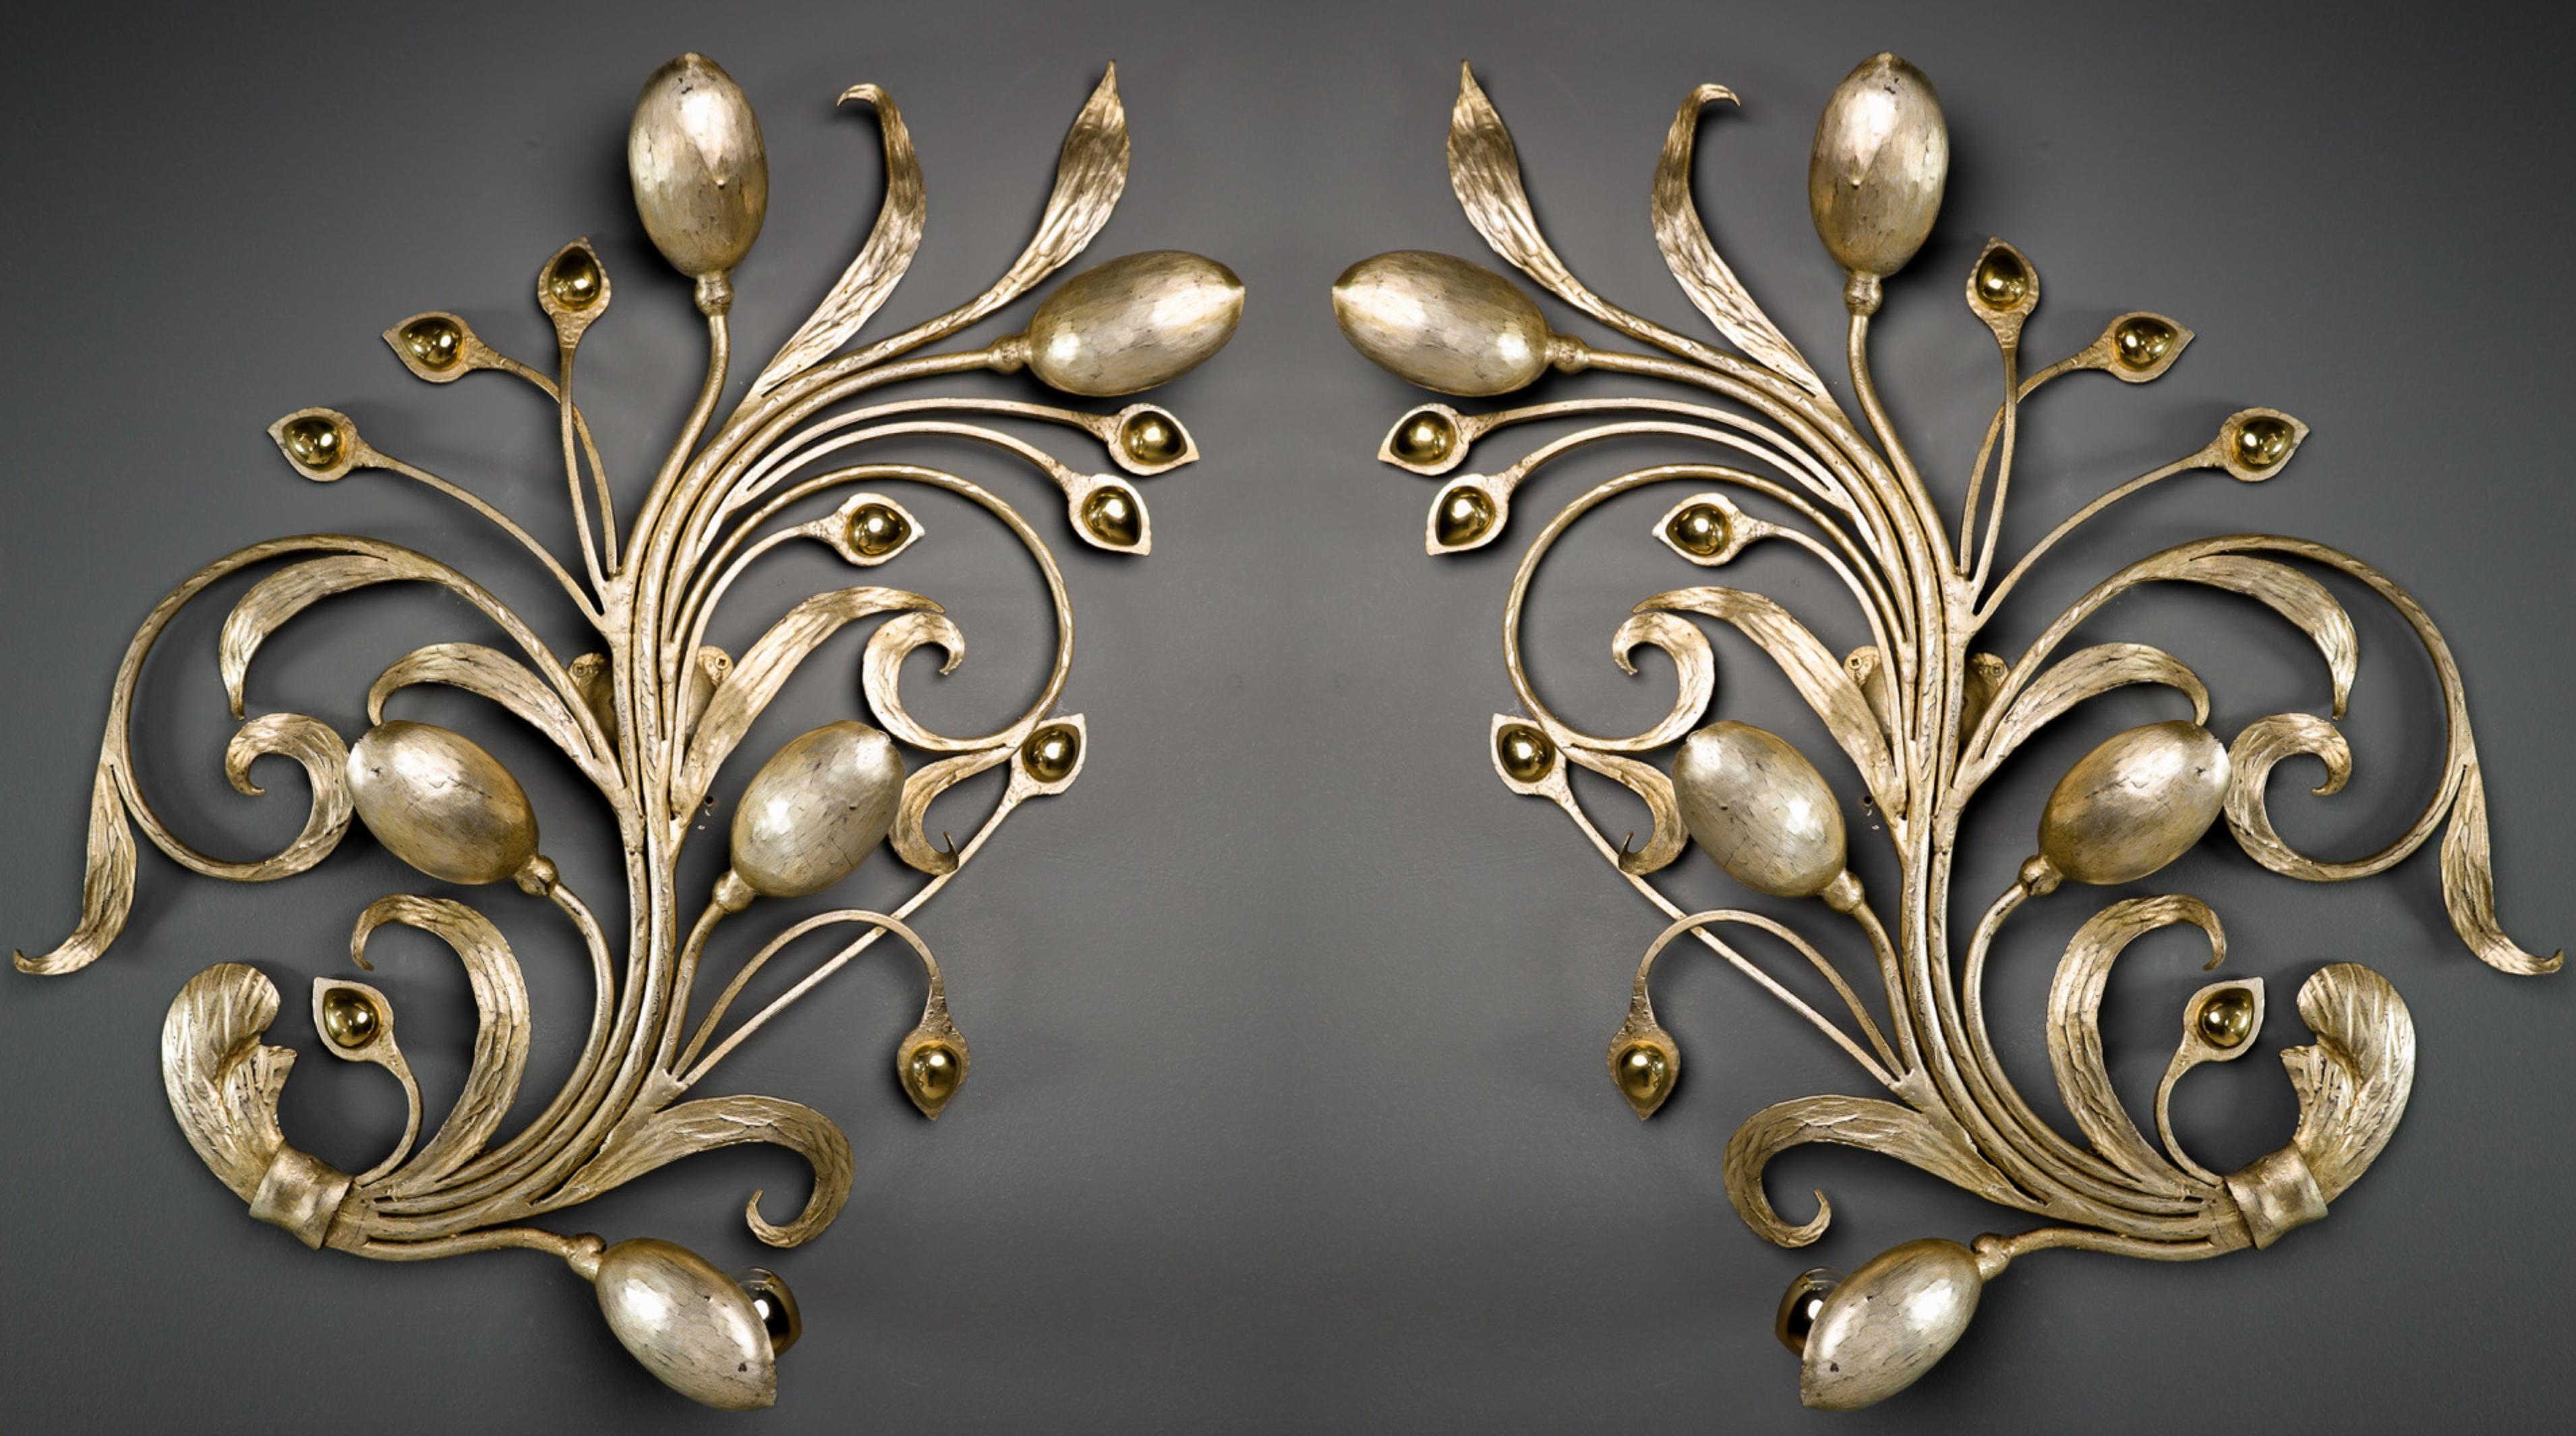 Pair of two monumental floral - leaf brass wall Lights / Sculptures by Hans Möller Made in Germany 1960s 

A pair of two monumental floral leaf brass wall lights / sculptures by Hans Möller, 1960s, Germany with high quality brass fixture and